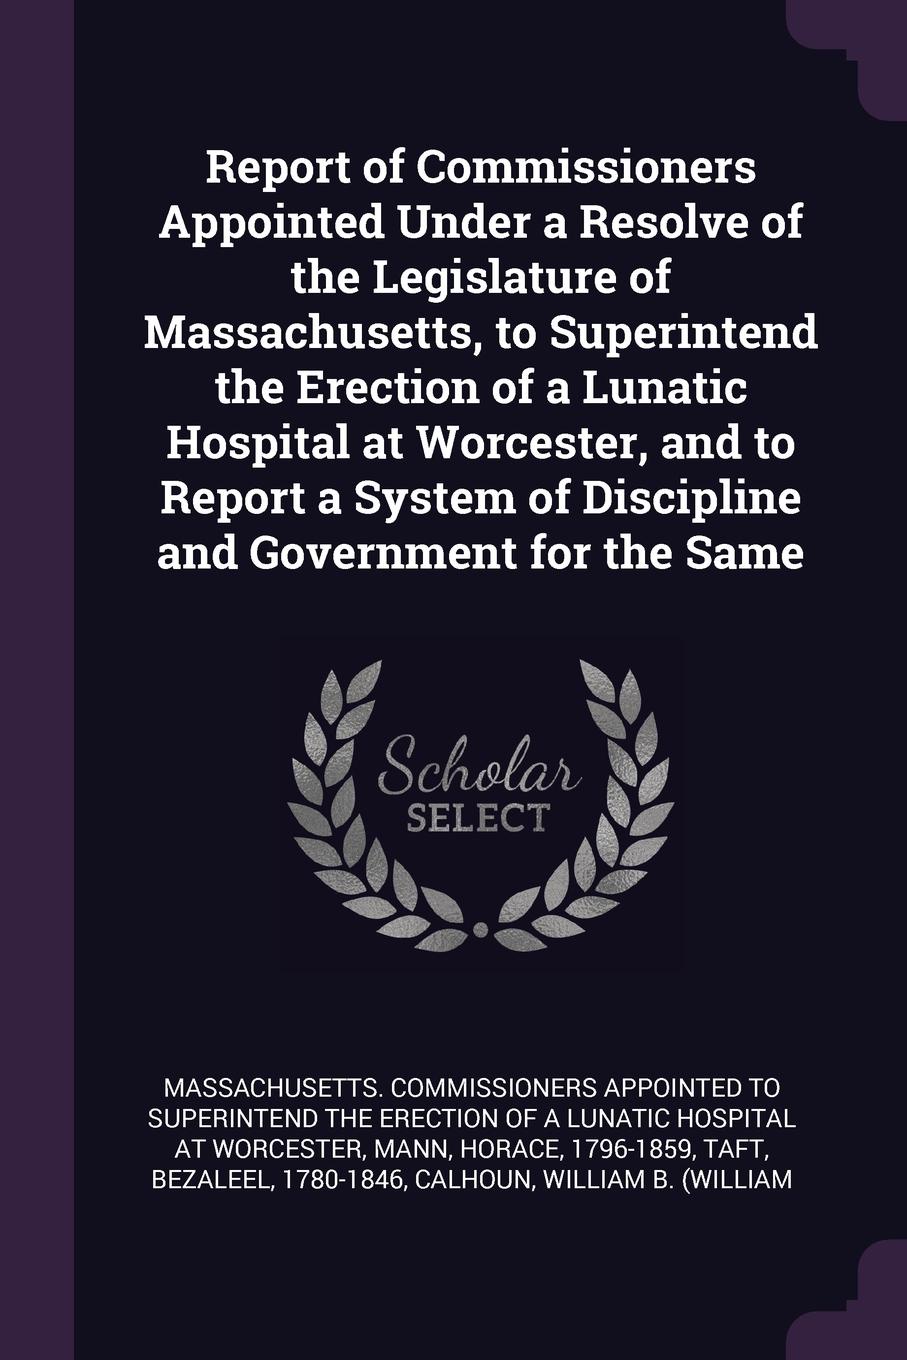 Report of Commissioners Appointed Under a Resolve of the Legislature of Massachusetts, to Superintend the Erection of a Lunatic Hospital at Worcester, and to Report a System of Discipline and Government for the Same